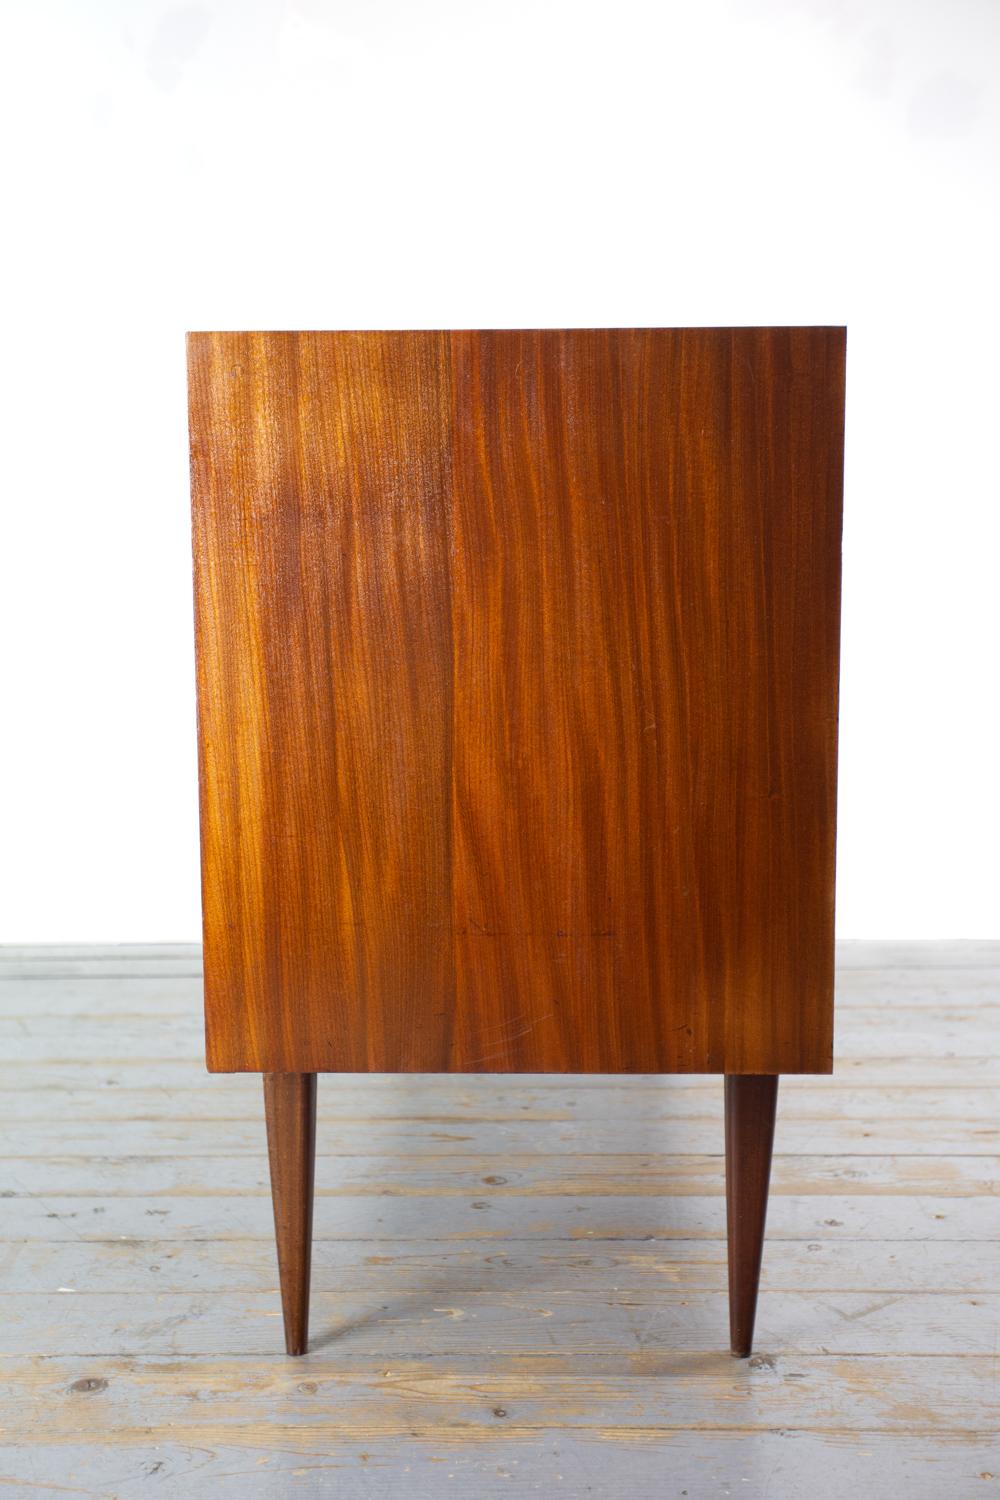 Mid Century Teak Sideboard

British Mid Century Afromosia Teak Sideboard by Richard Hornby for Fyne Ladye in the 1960s and retailed through Heals. Superb craftsmanship throughout, carved from solid from Afrormosia with beautiful cutaway handle